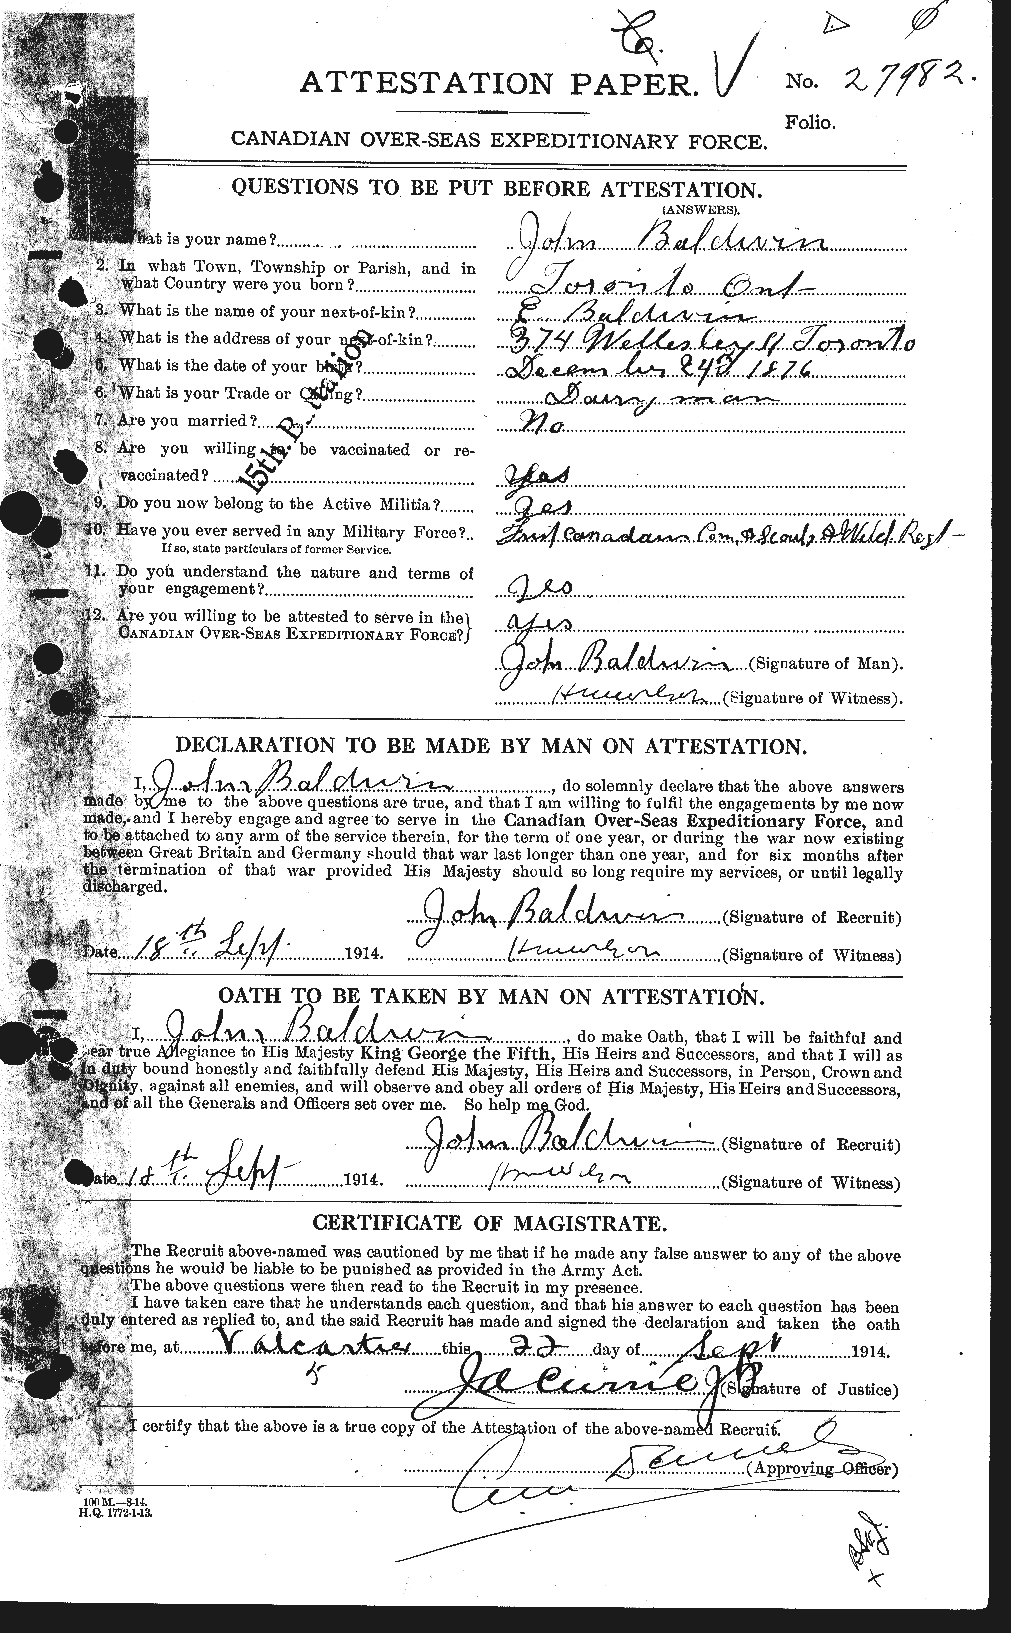 Personnel Records of the First World War - CEF 225218a